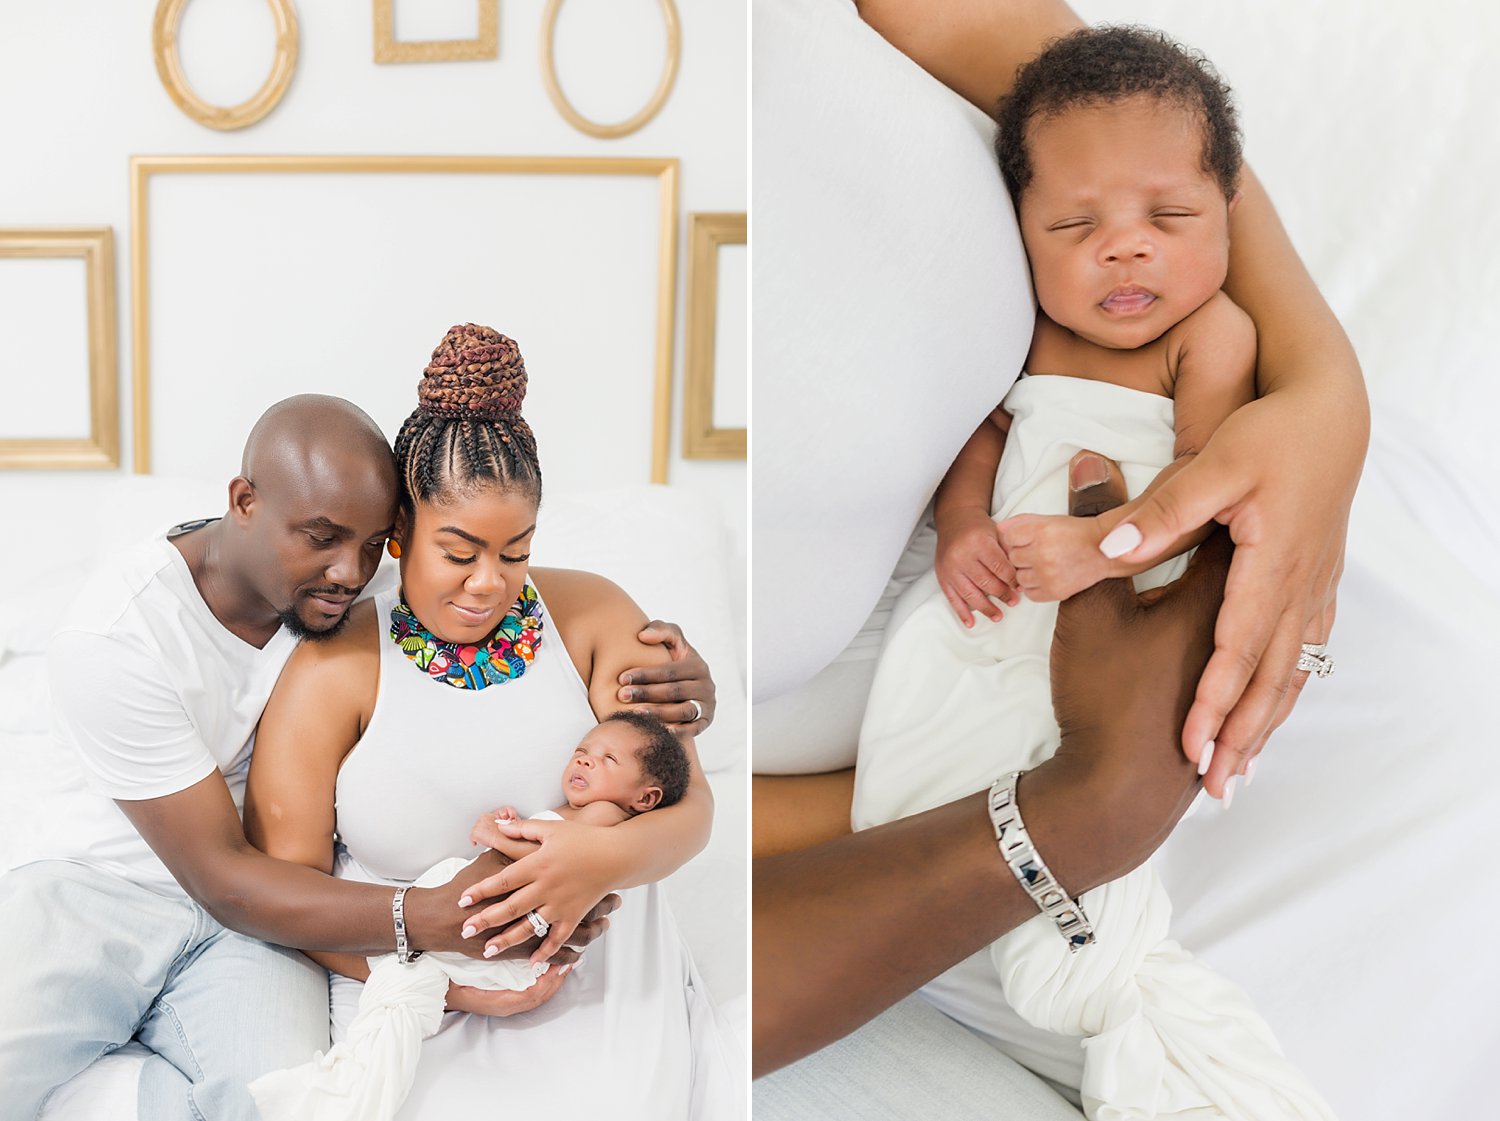 newborn baby boy cuddled in the arms of his parents in a white studio with a gold frame gallery wall